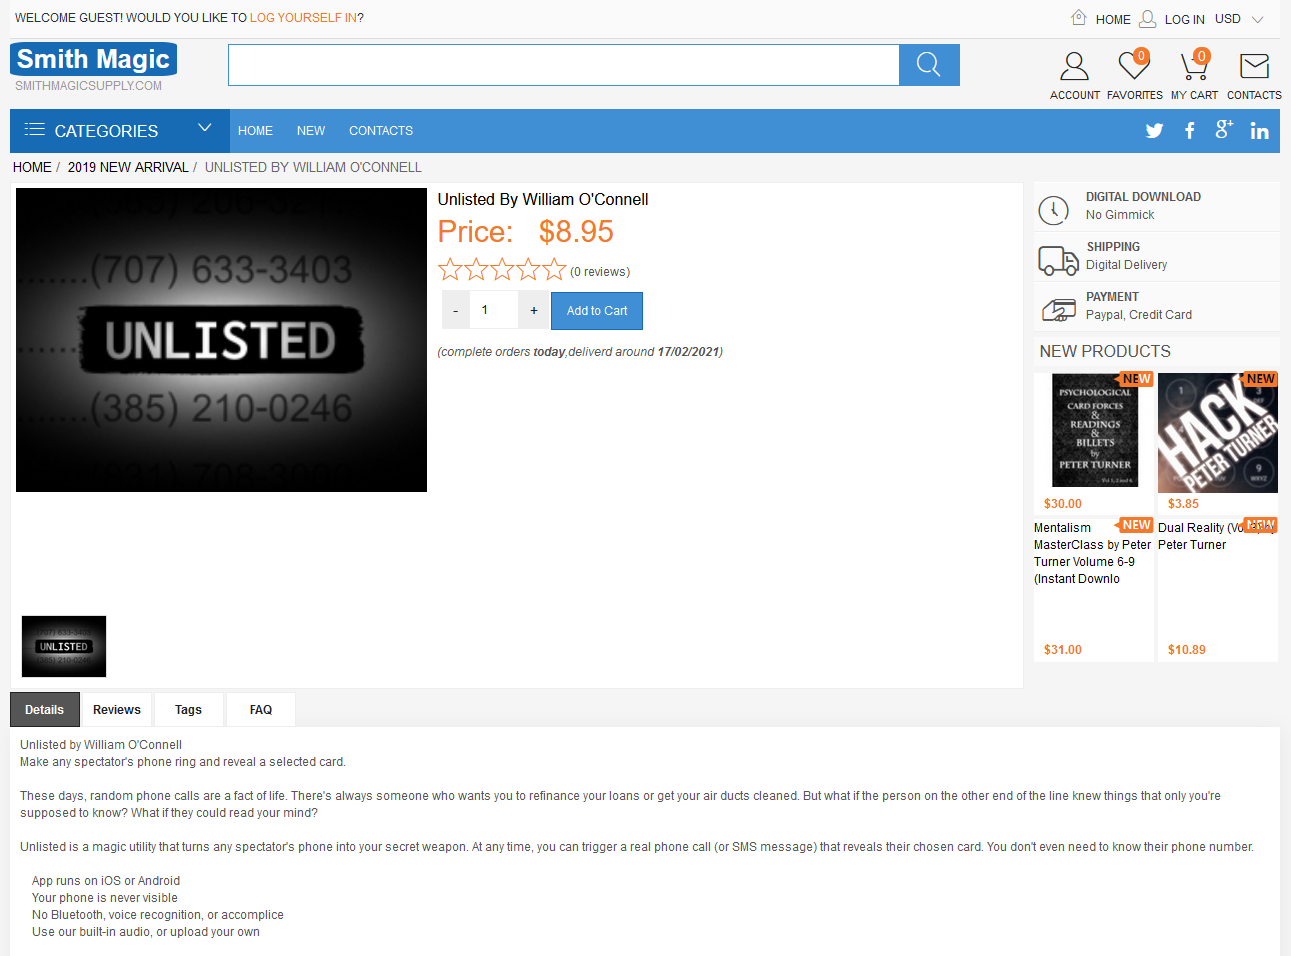 Screenshot of Smith Magic selling Unlisted for $8.95